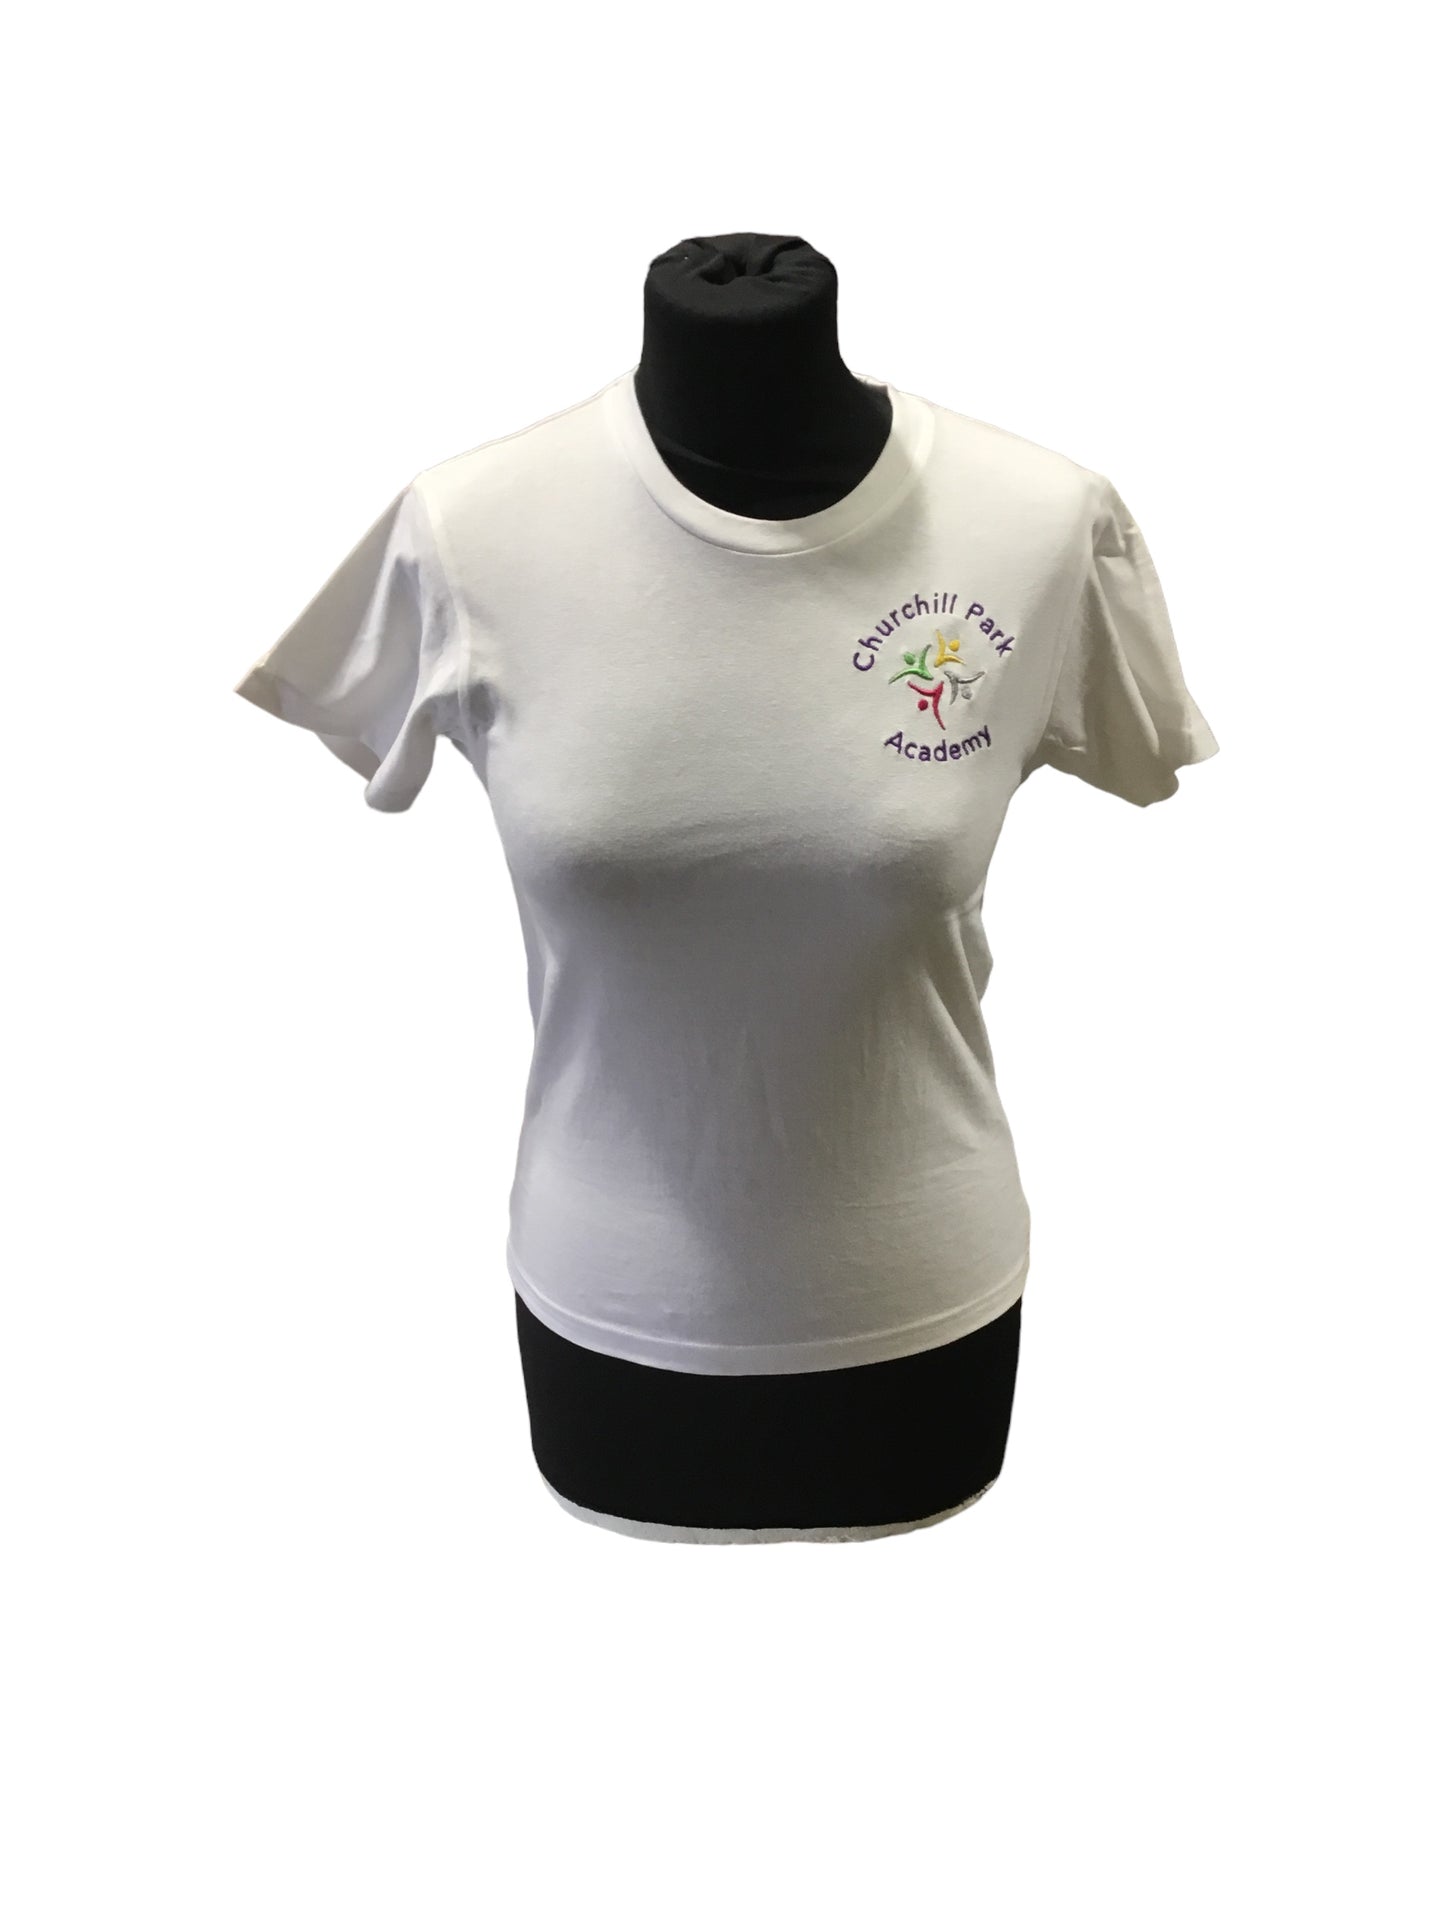 T-Shirt with Churchhill Park Academy Embroidery